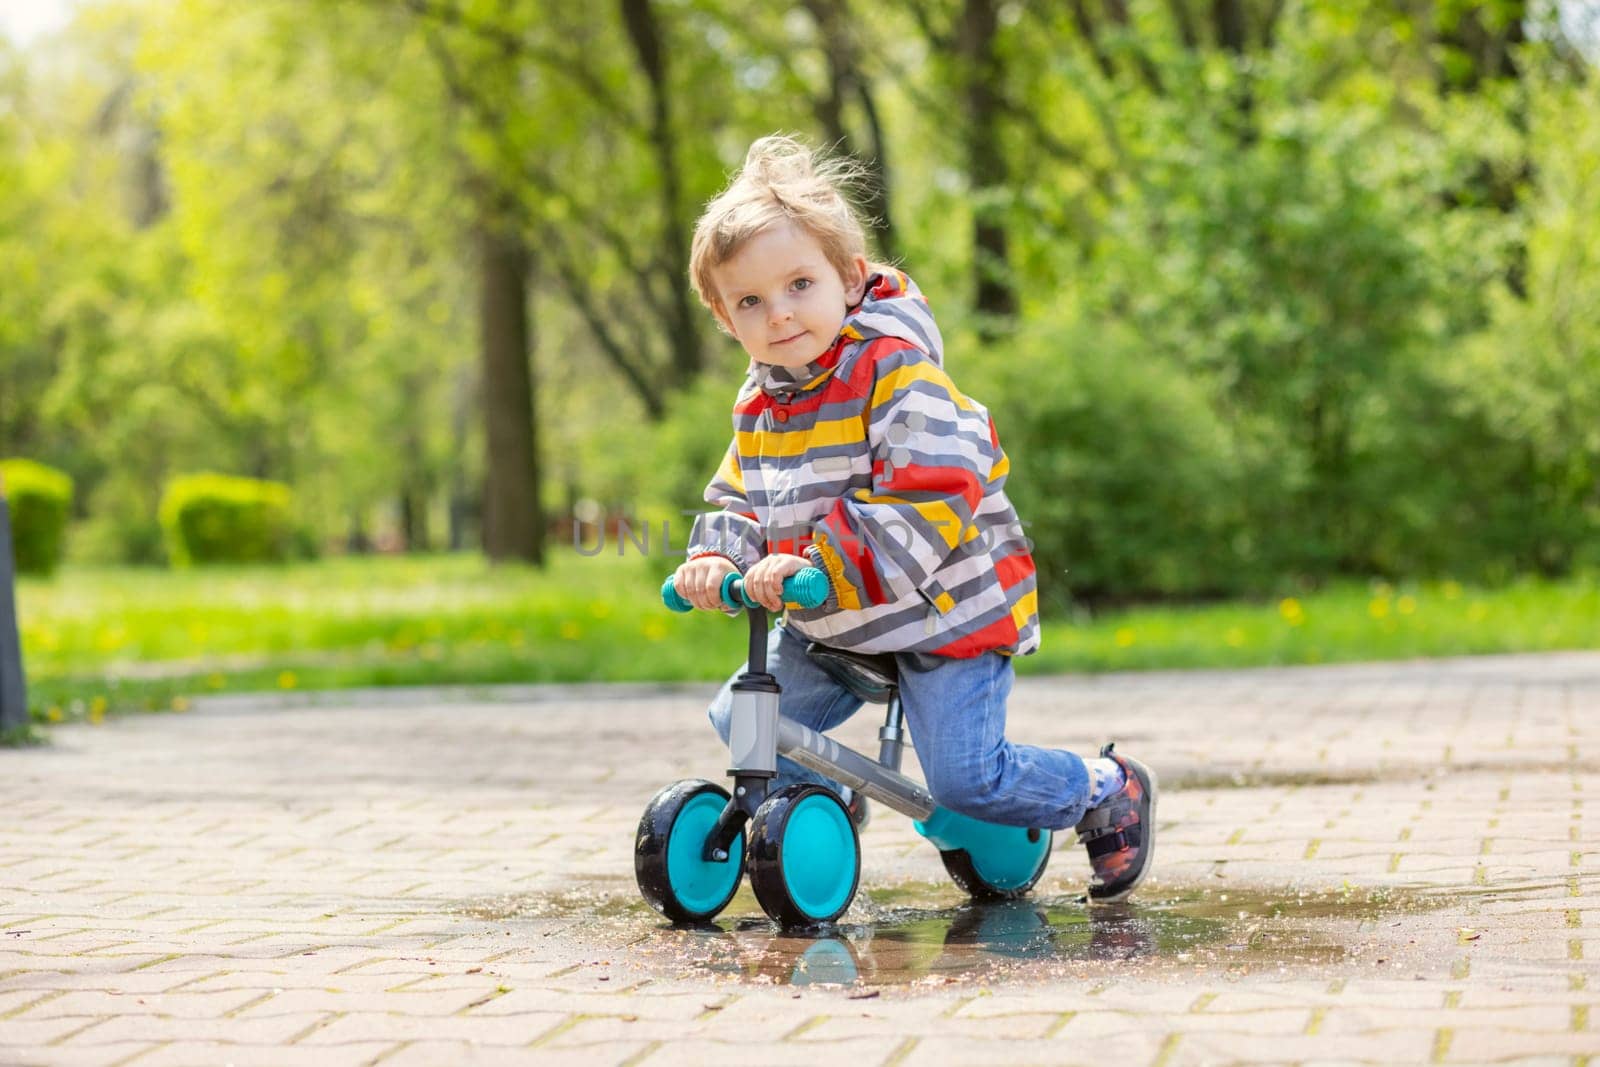 Active blond boy riding balance bike or run bike outdoor park. Active kid playing outside